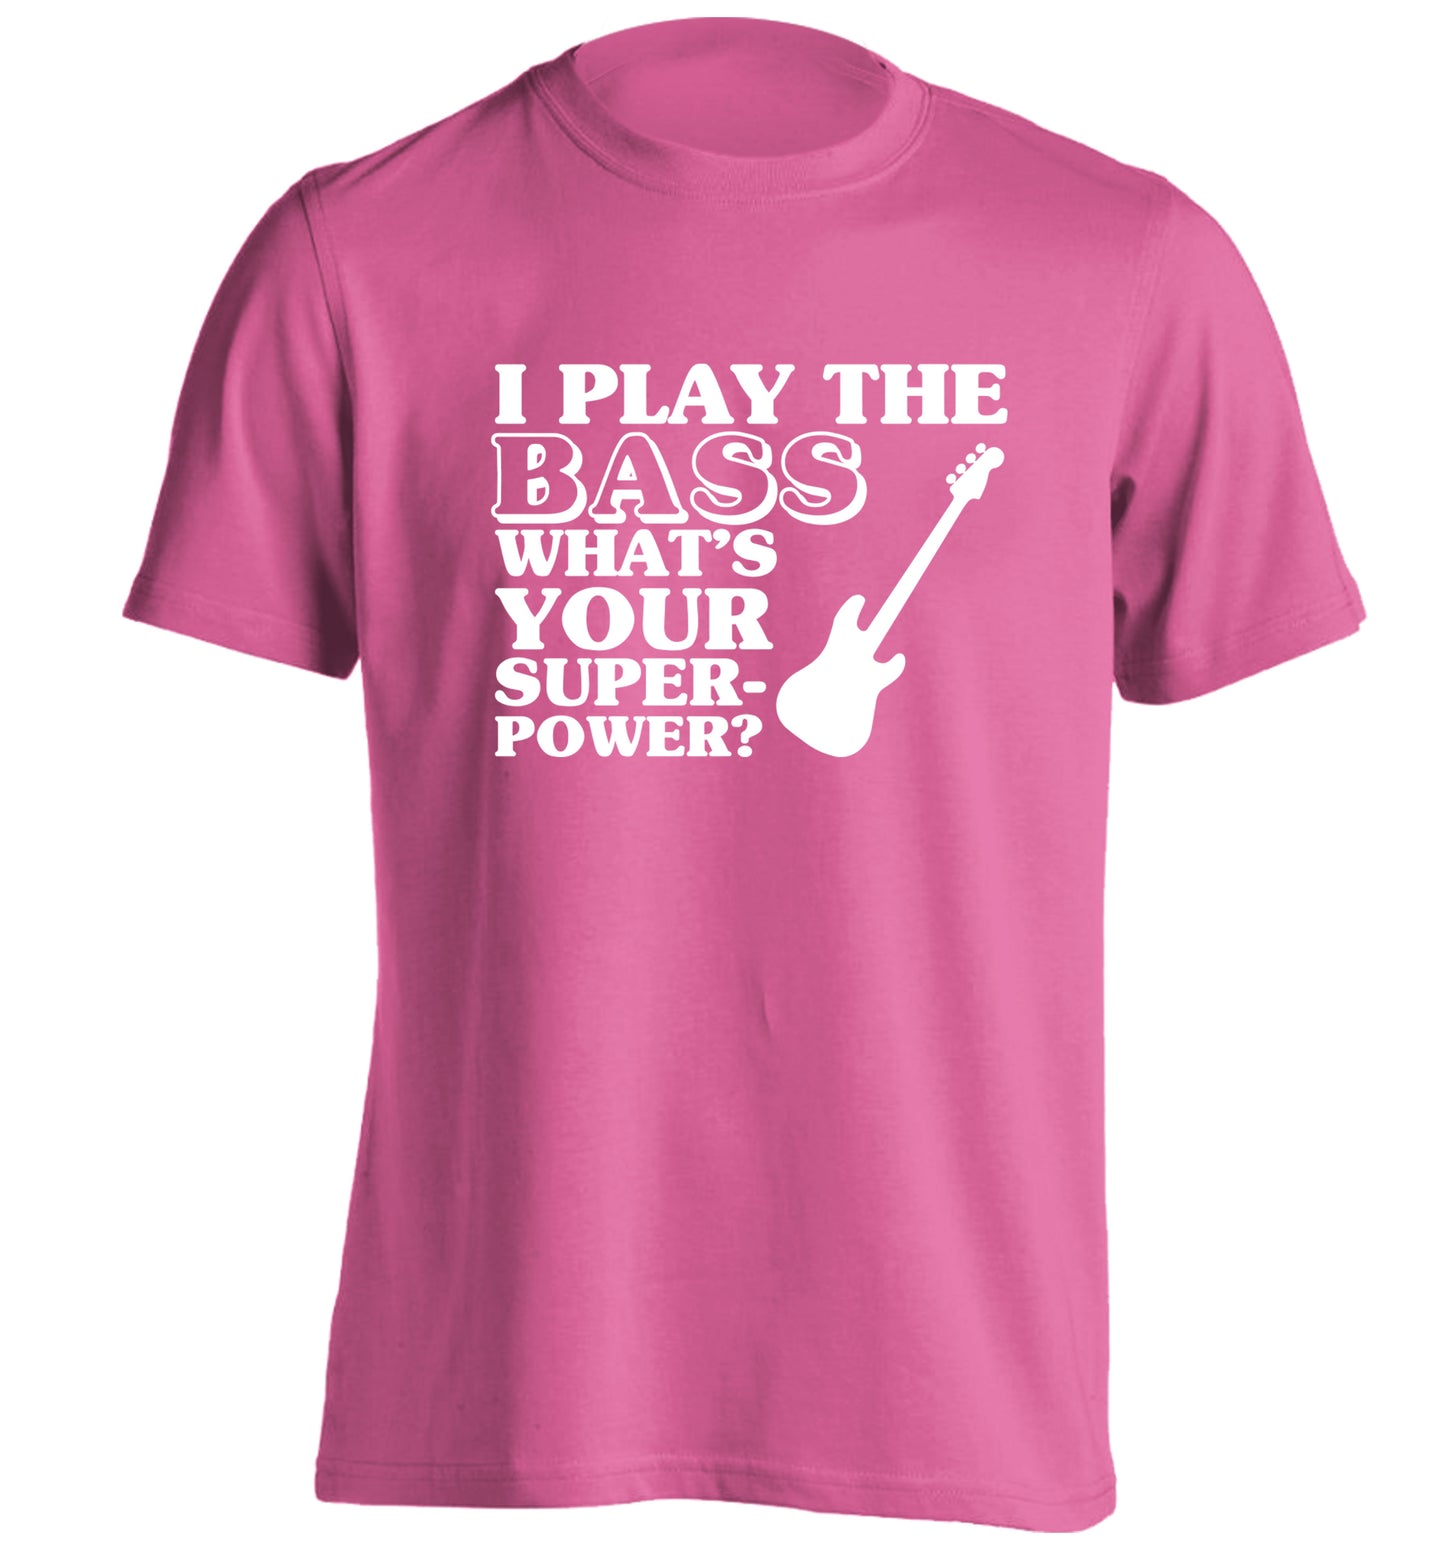 I play the bass what's your superpower? adults unisex pink Tshirt 2XL